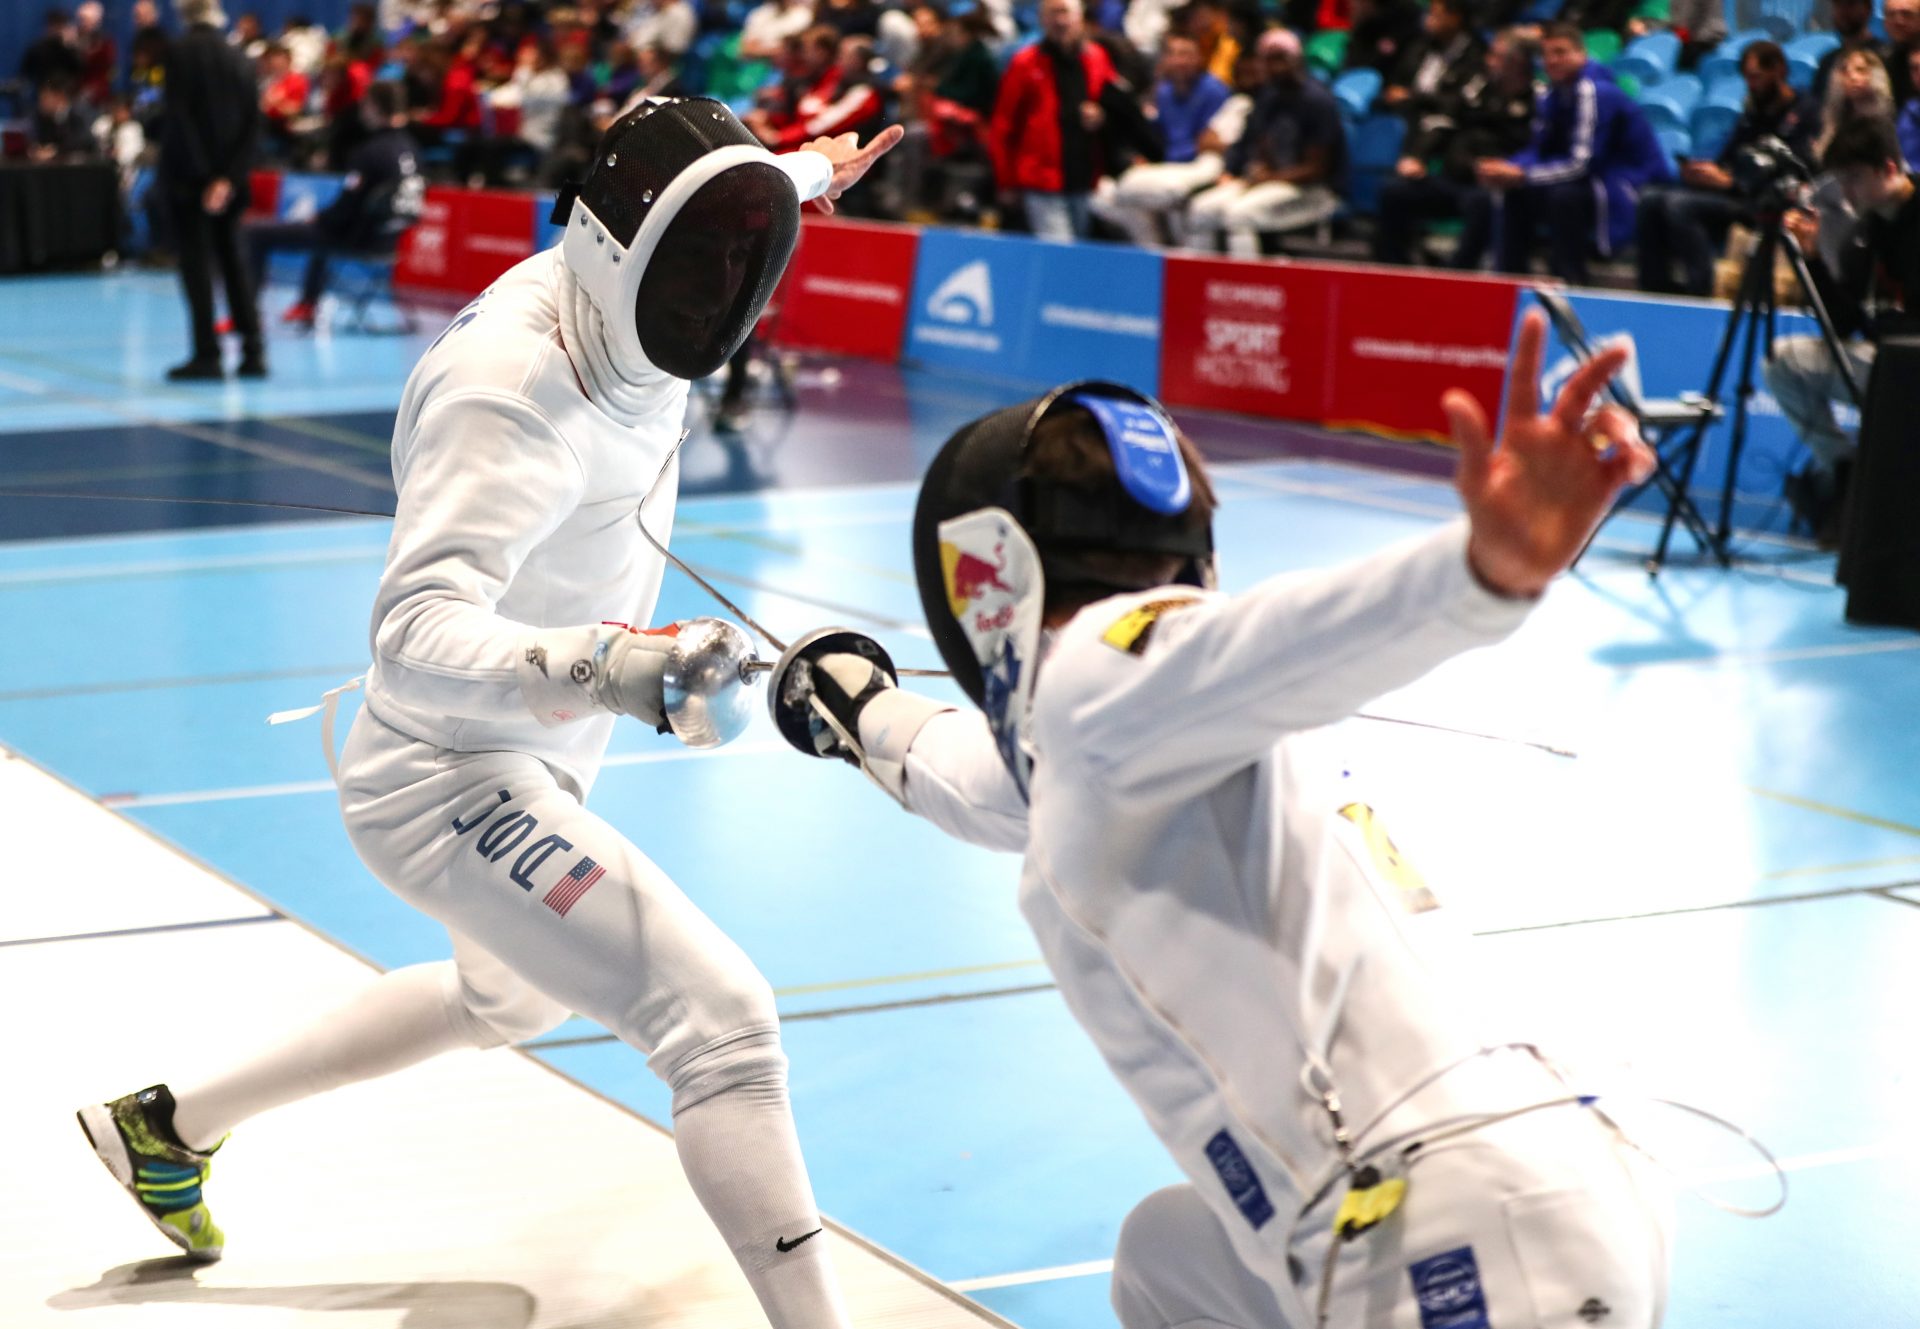 Fencer Alen Hadzic Loses Olympic Village Appeal Amid Sexual Misconduct Allegations